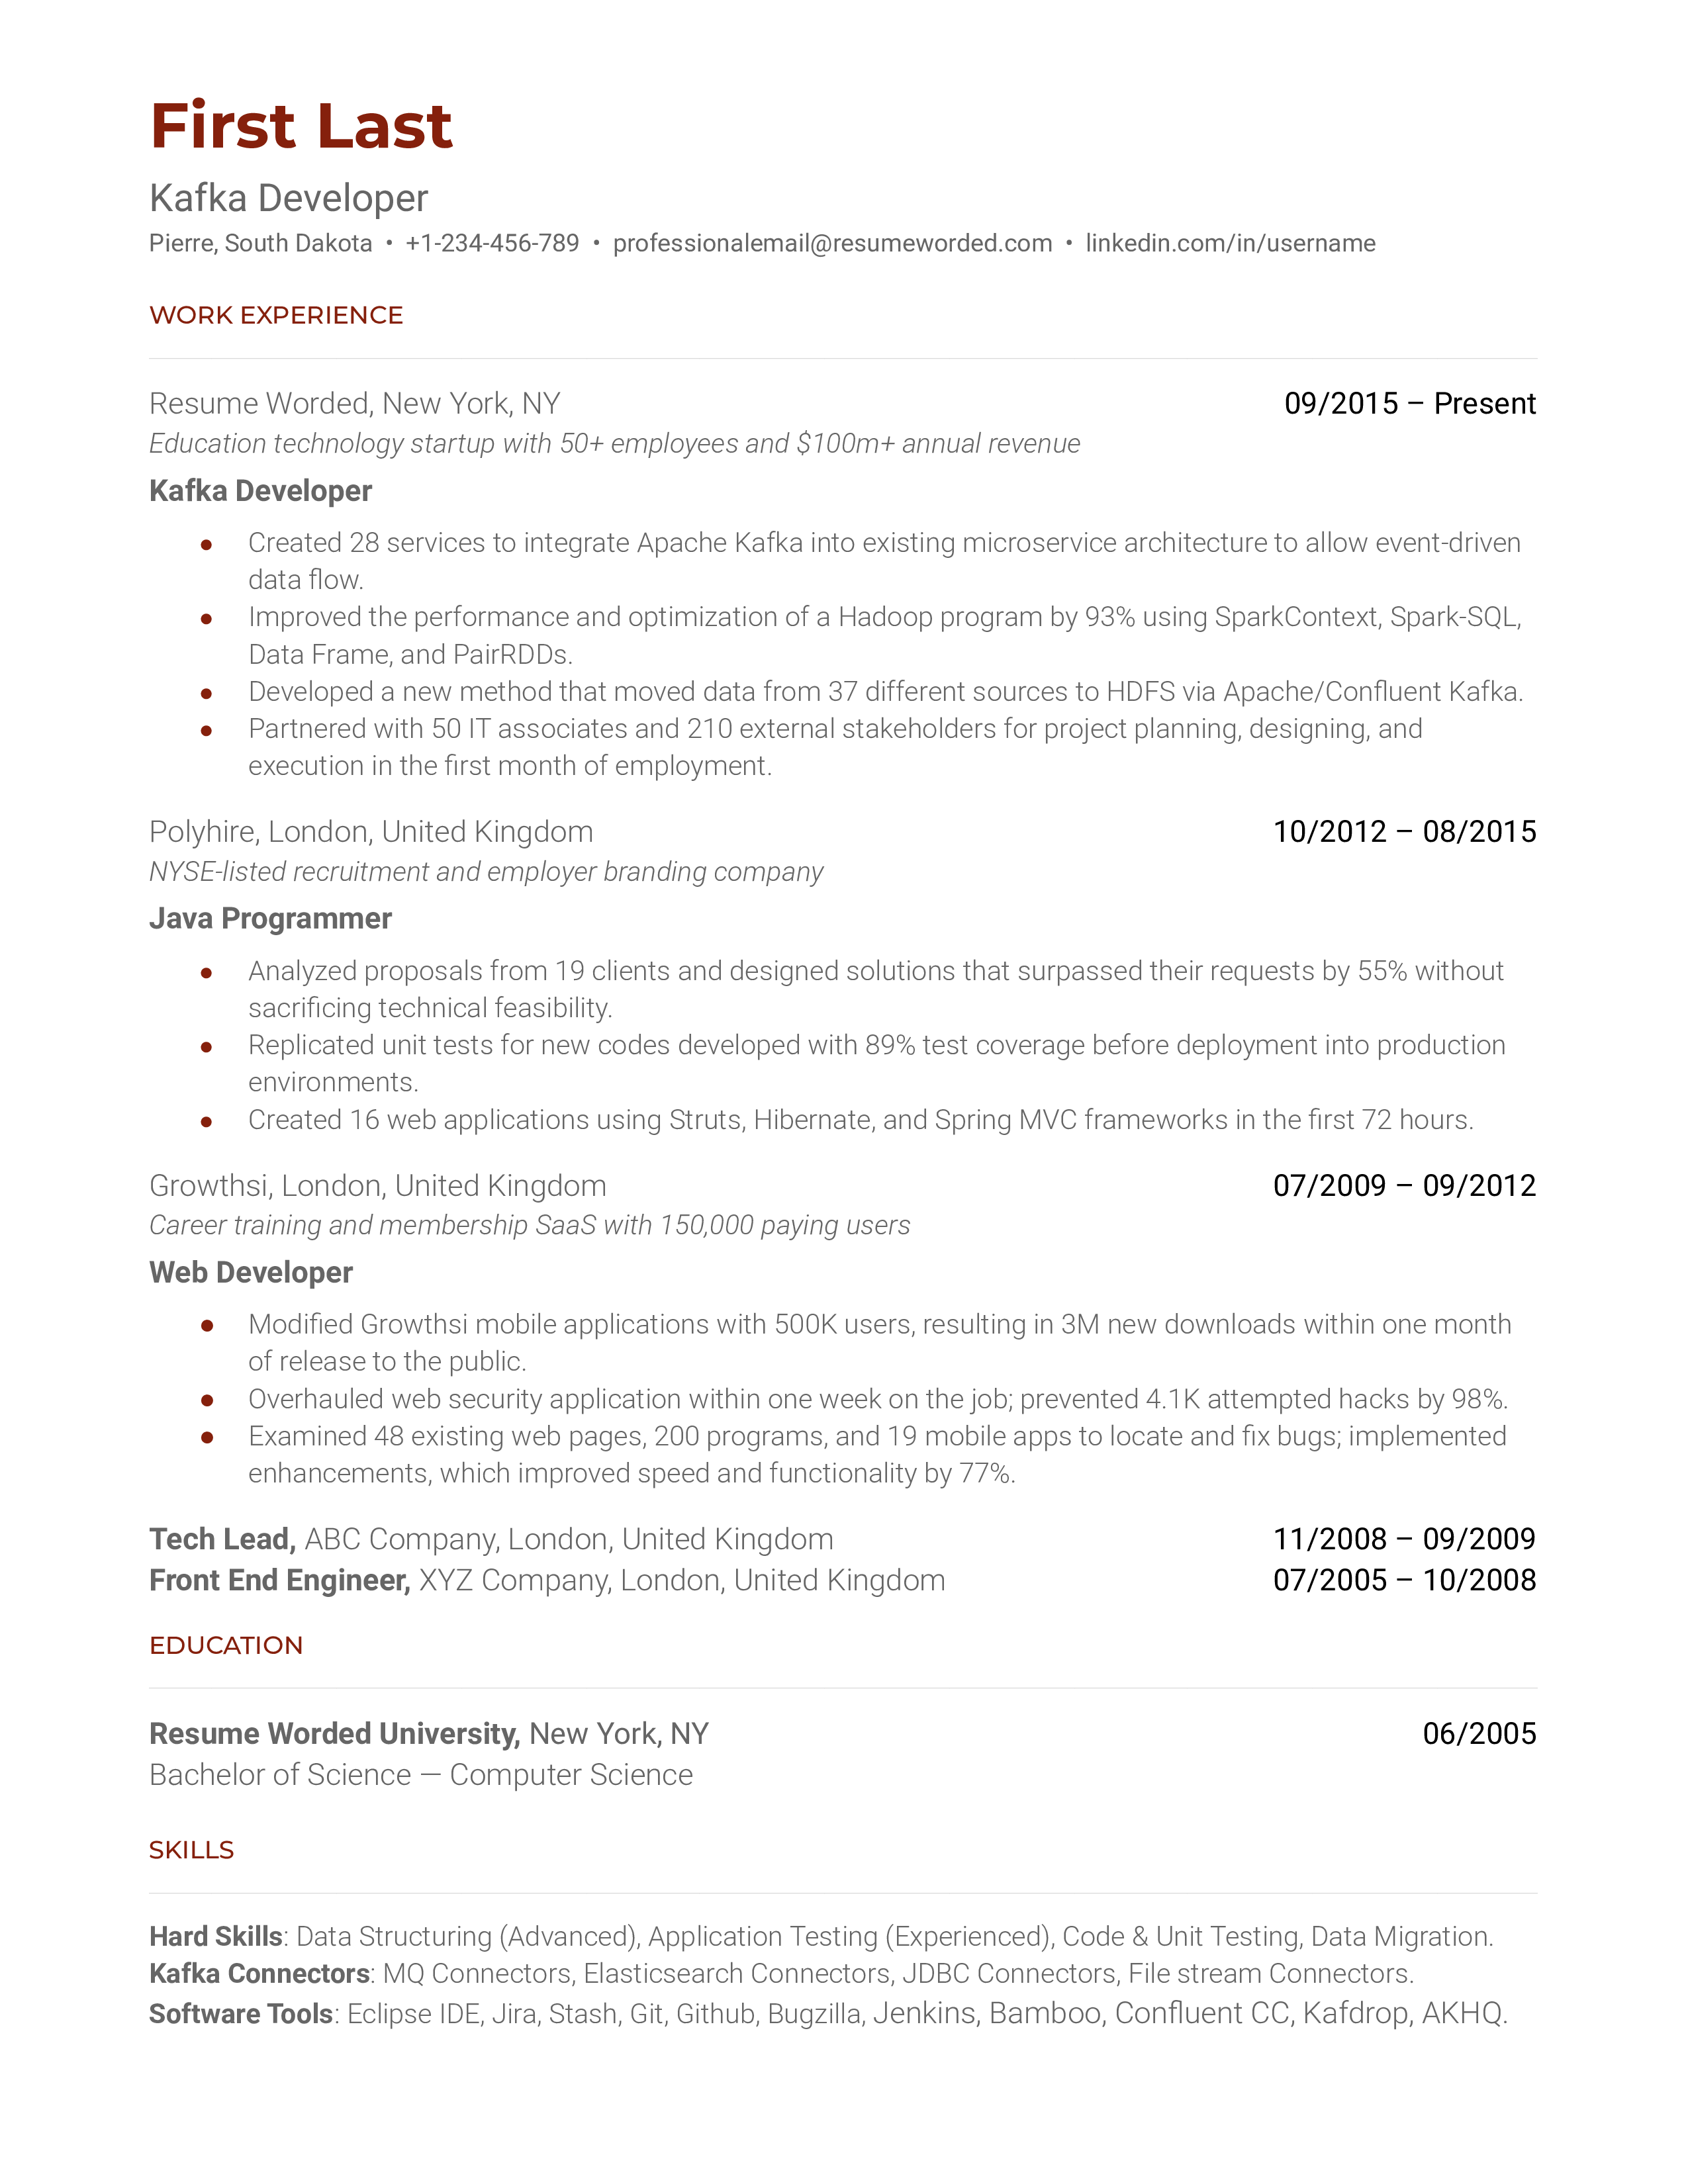 A Kafka developer resume template that includes contact information and relevant work experience